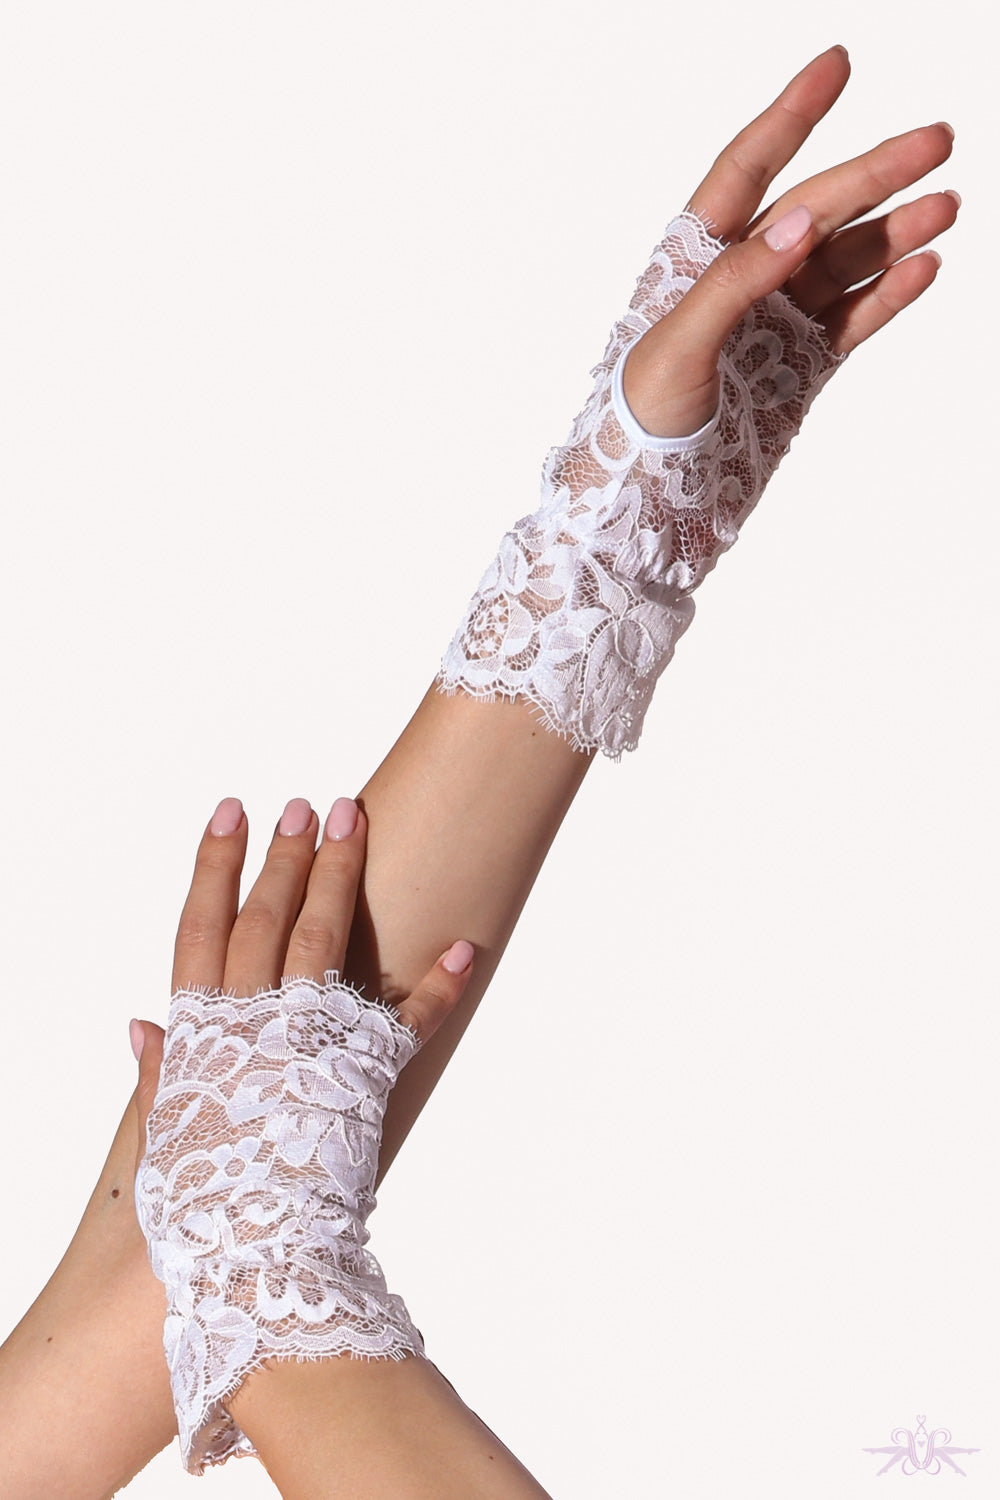 2 Pieces Suspender Pantyhose Long Floral Lace Gloves Stocking